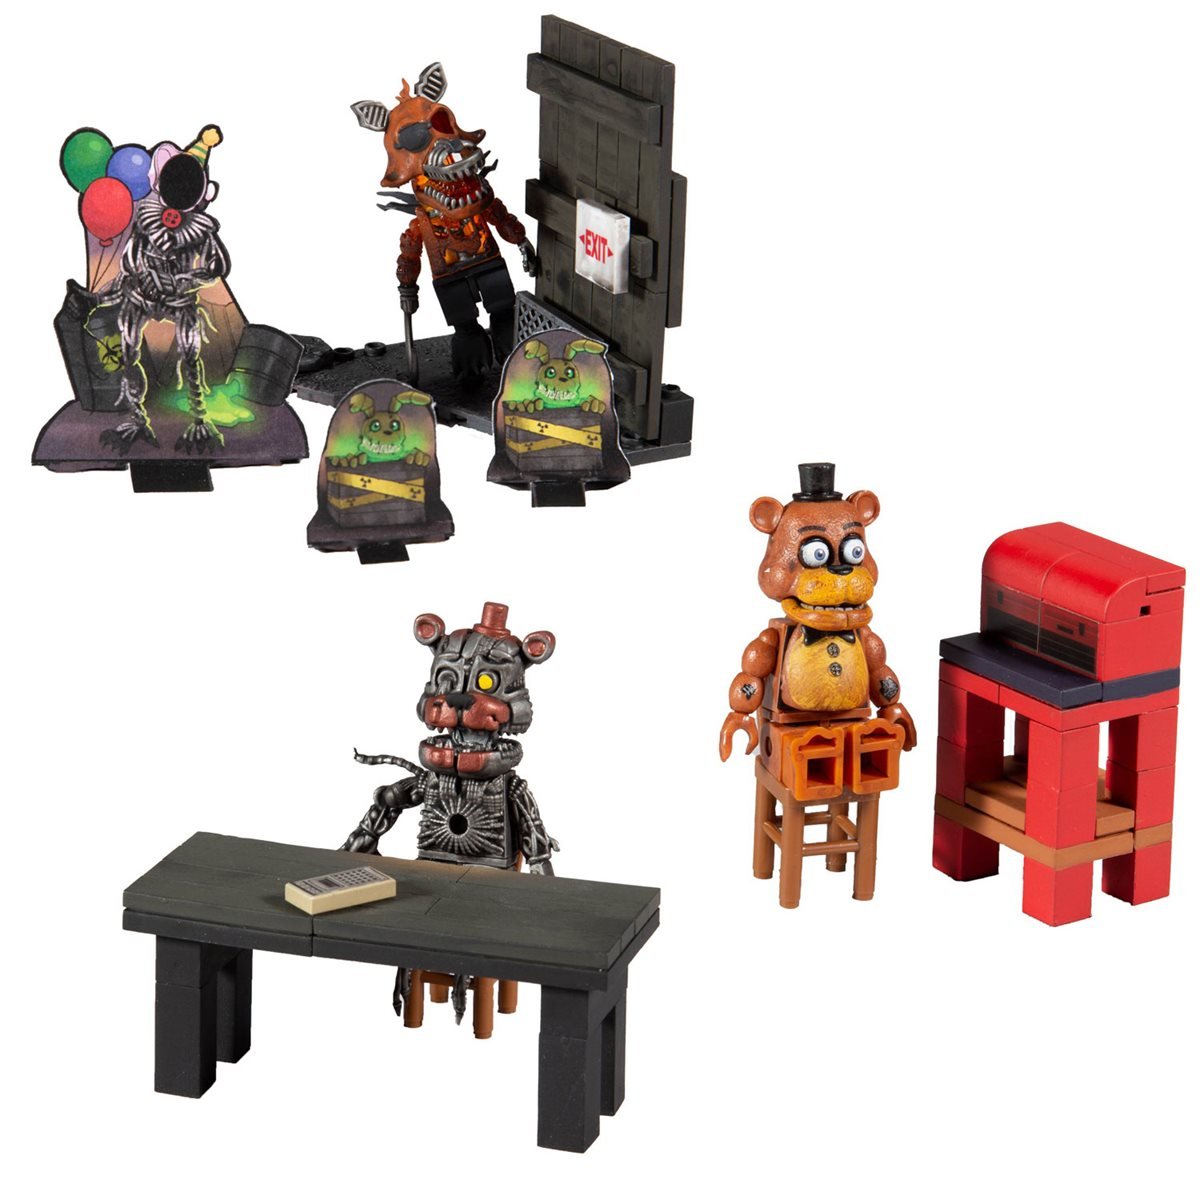 McFarlane Toys Five Nights At Freddy's Large Construction Set